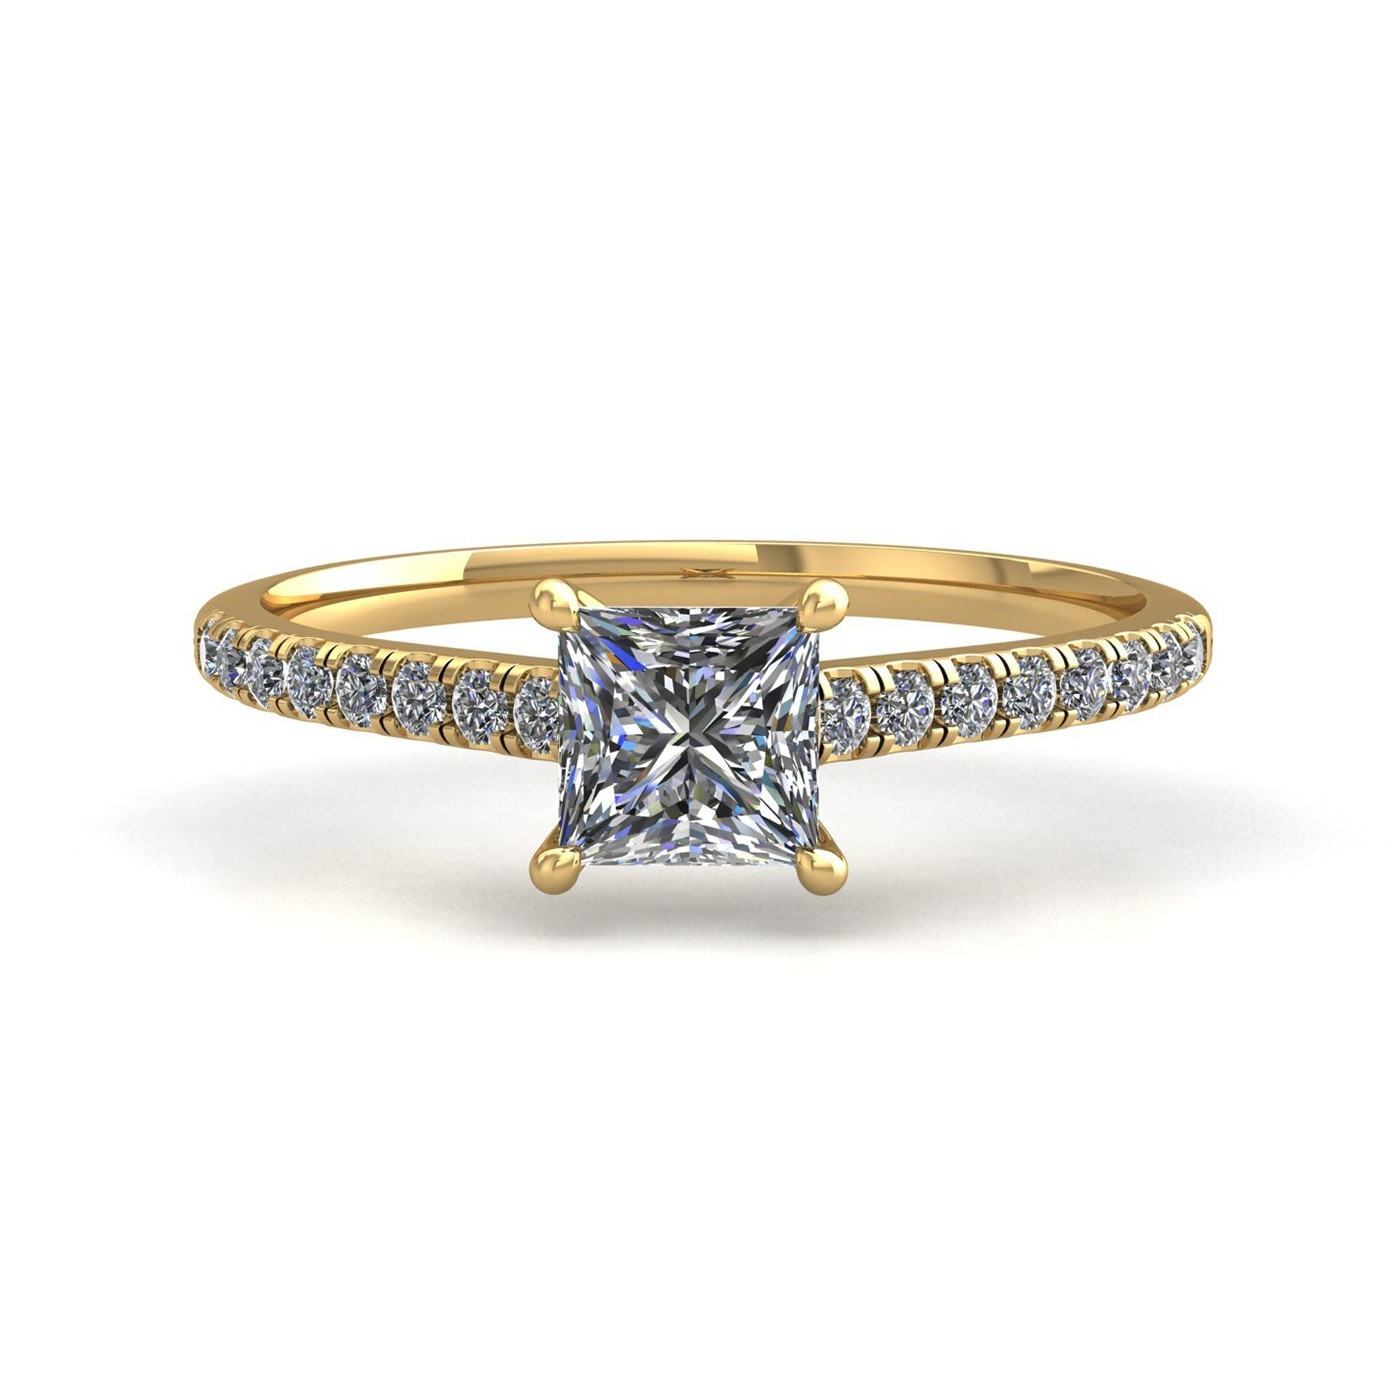 18k yellow gold  0,80 ct 4 prongs princess cut diamond engagement ring with whisper thin pavÉ set band Photos & images